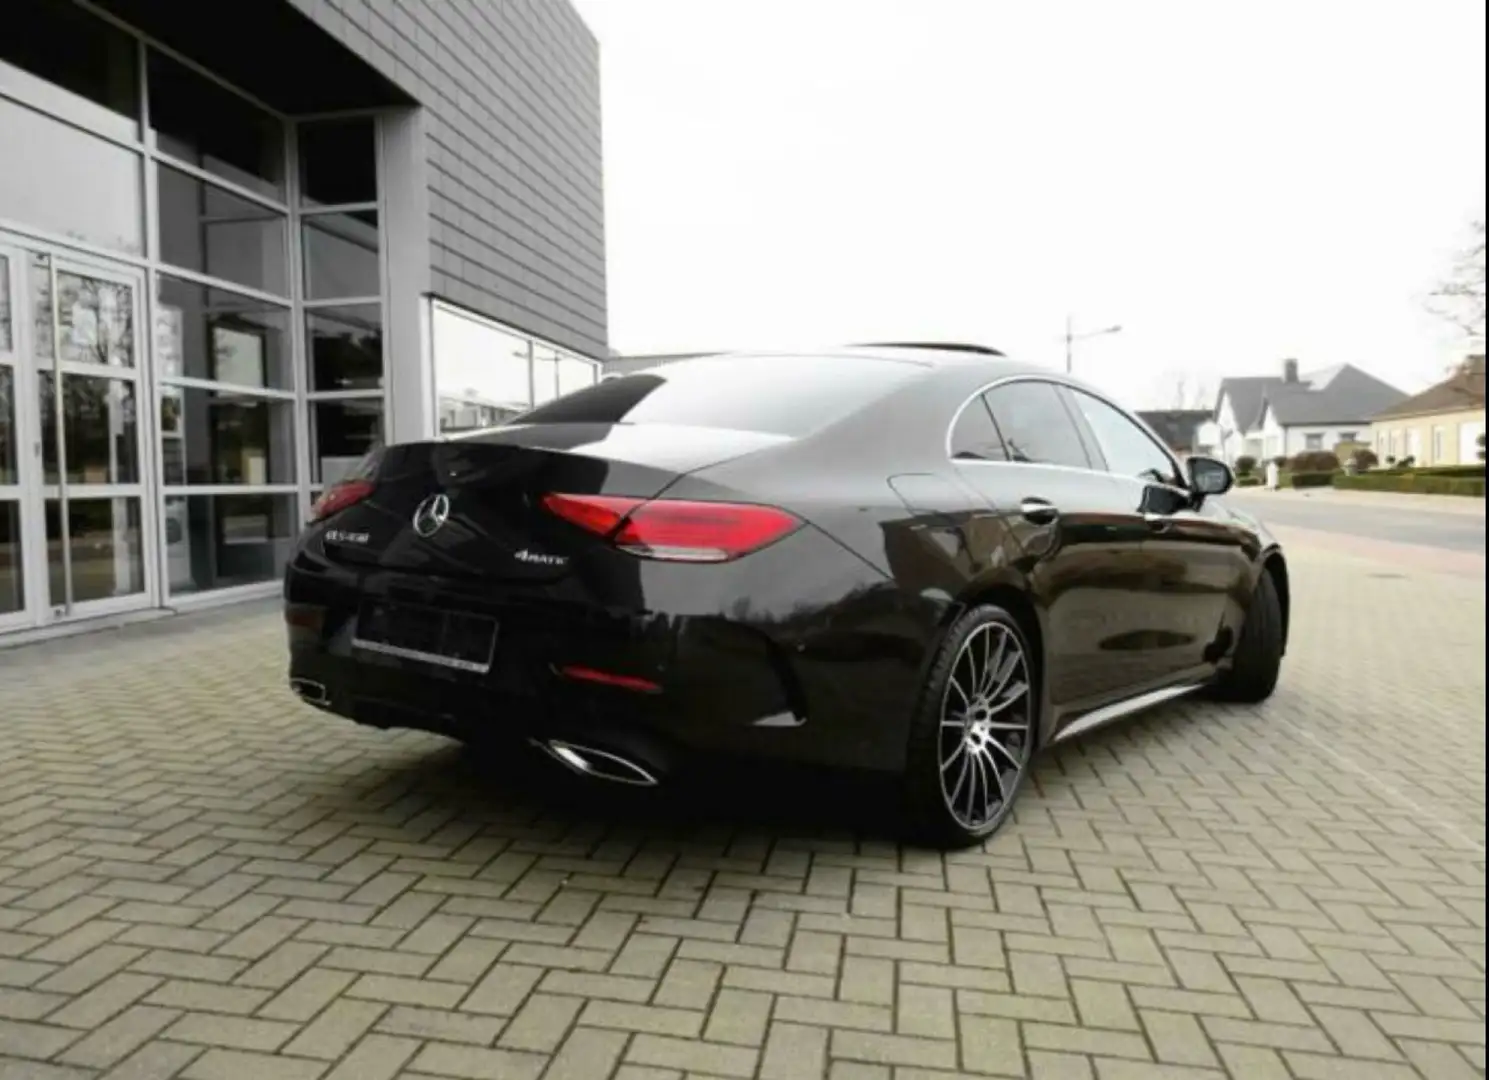 Mercedes-Benz CLS 450 4Matic 9G-TRONIC Edition 1 full option siva - 2